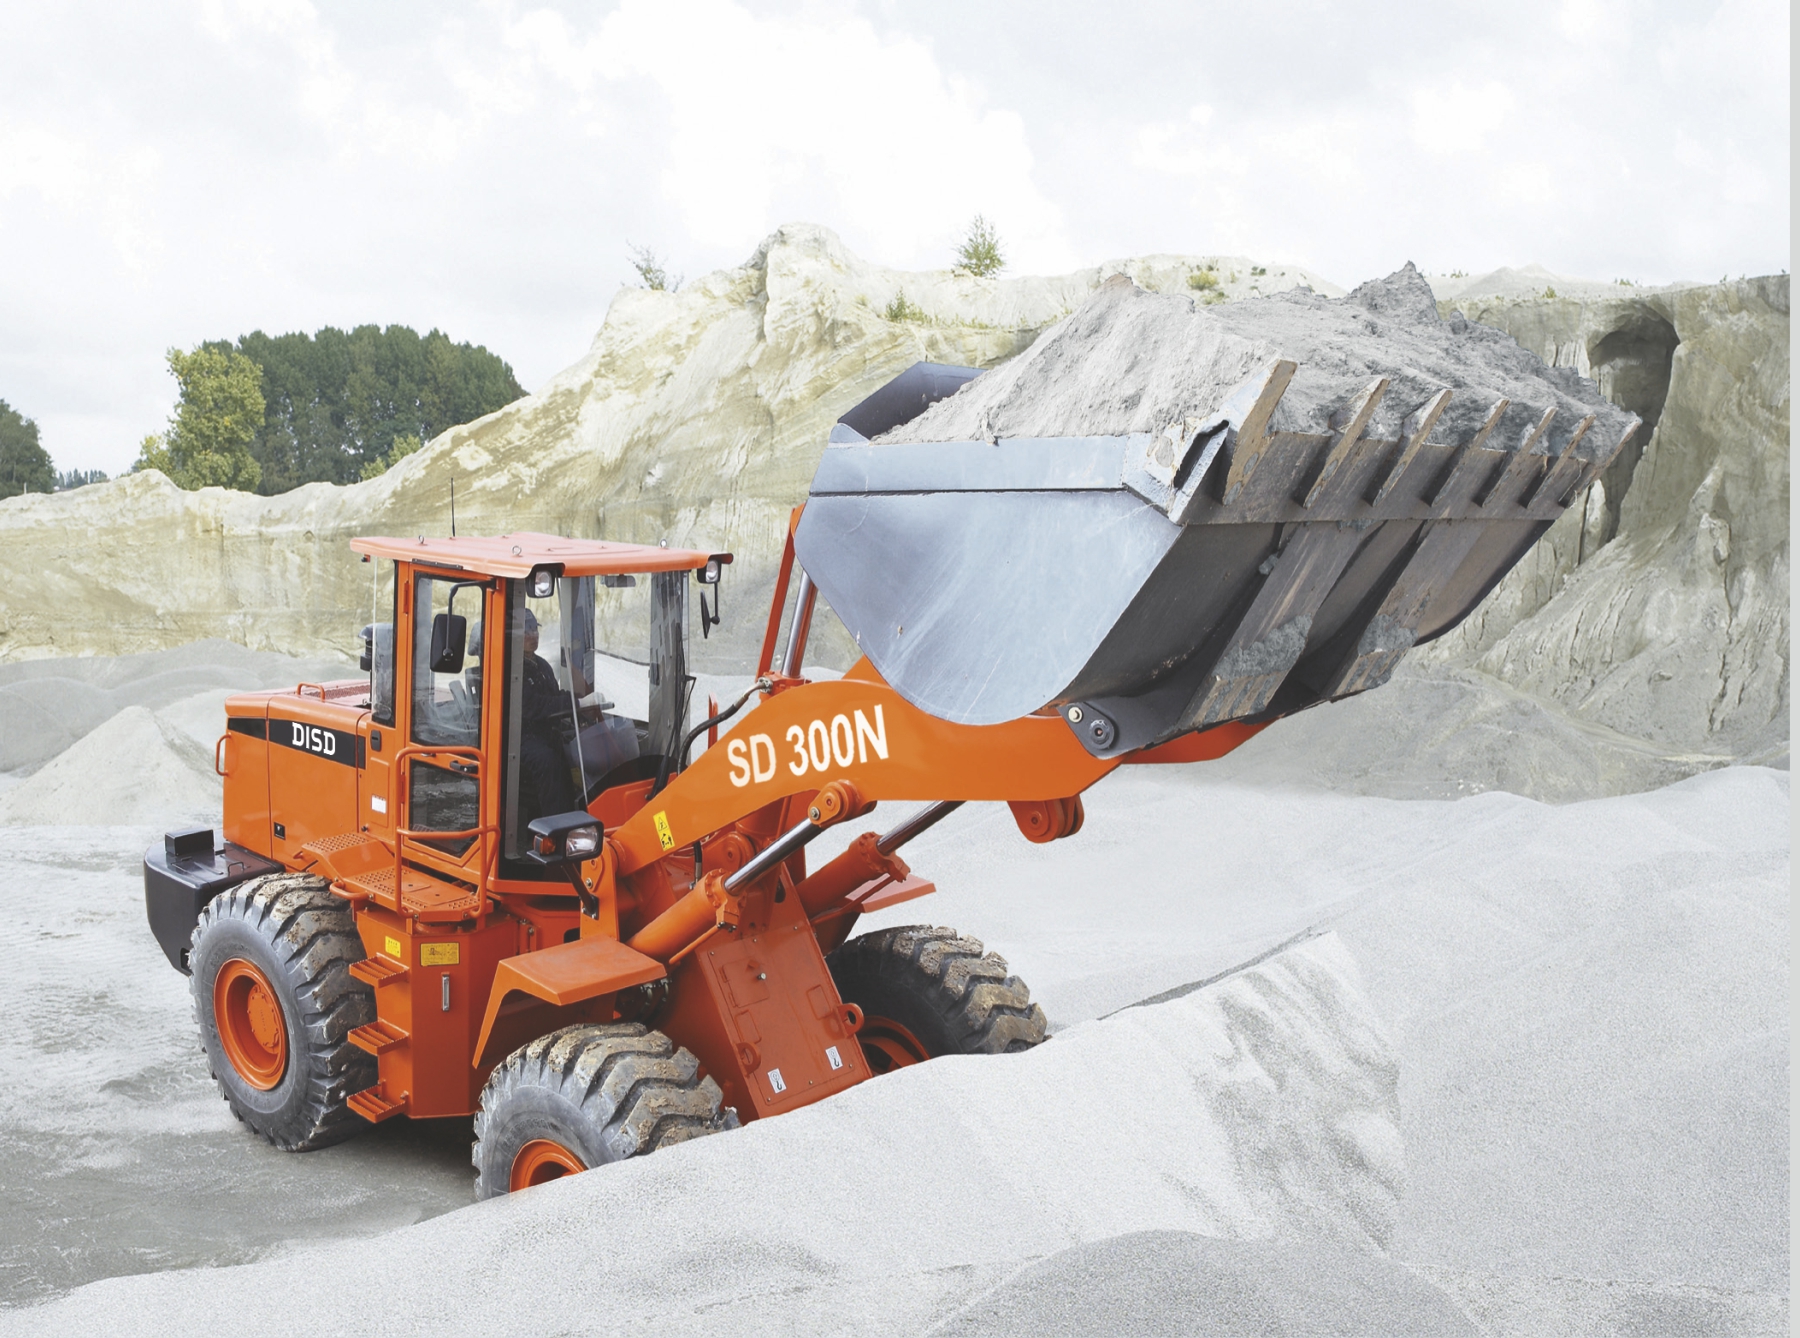 Front loaders DOOSAN SD300N, SD200N with a discount up to 2 million tenge